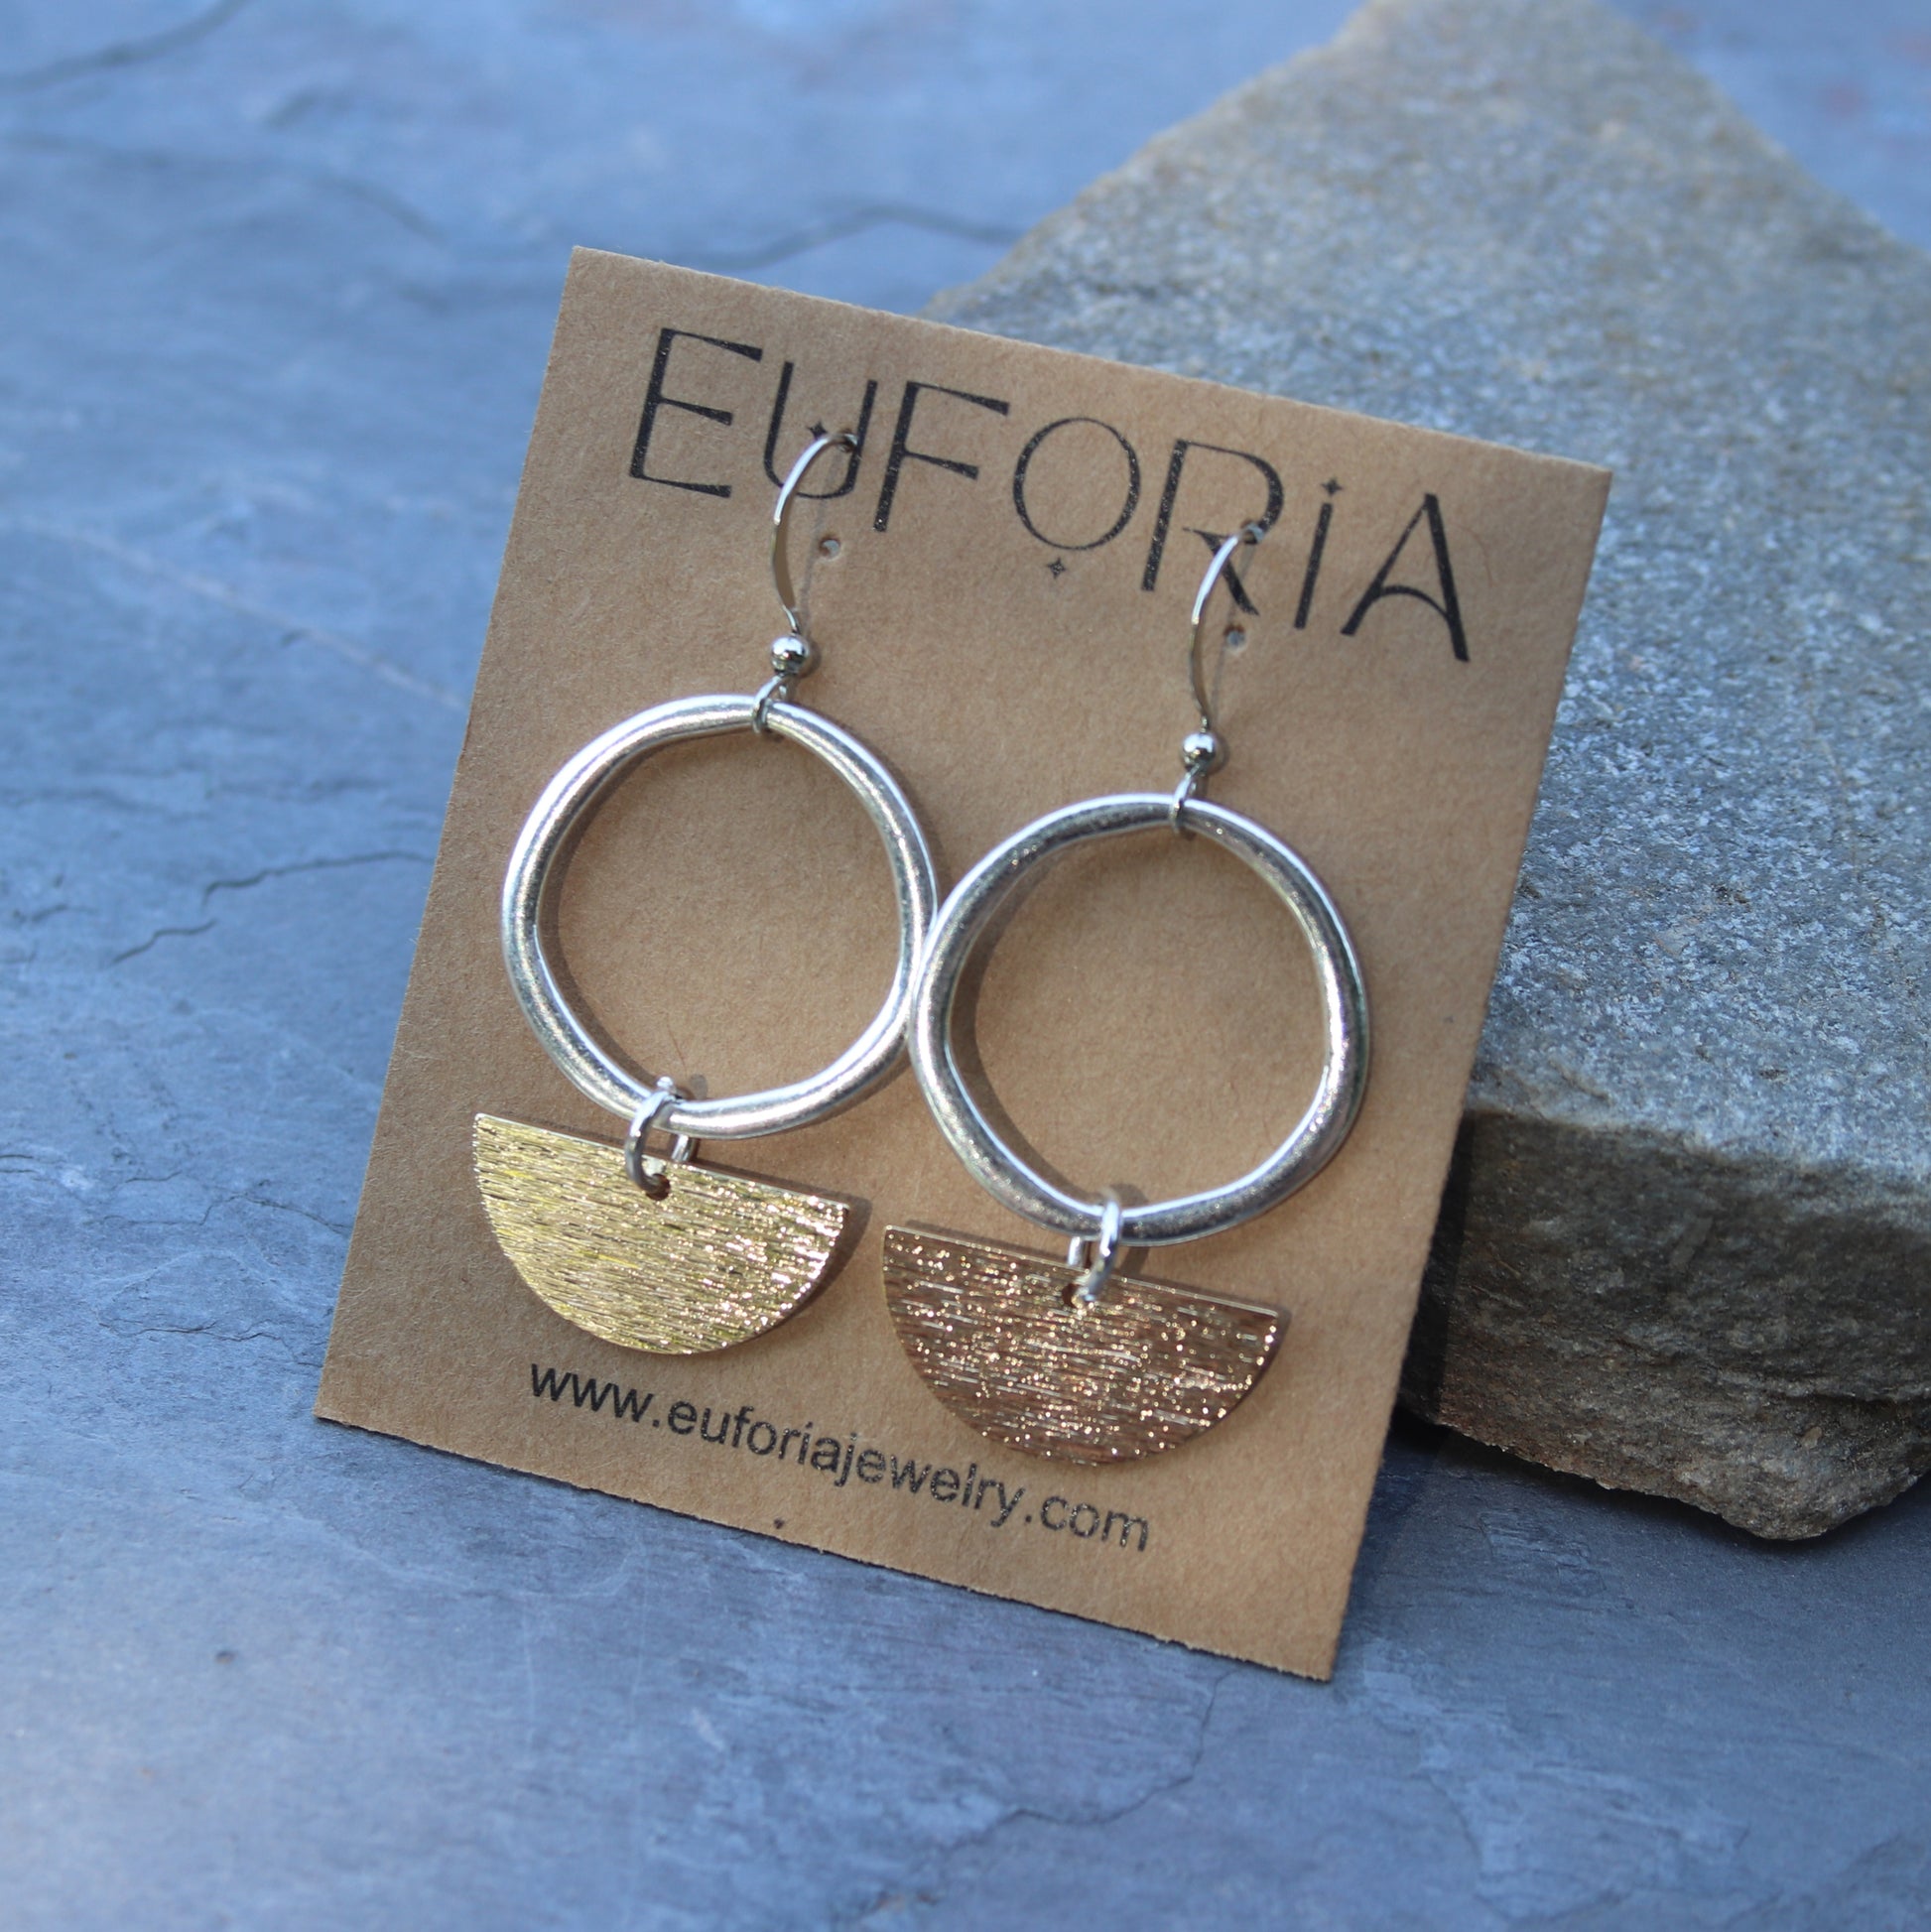 Organic silver plated open circle charm with brushed brass half circle charm dangle earrings.   Circle charm is a touch under 1" wide OD. Stainless ear wires, total length 2"